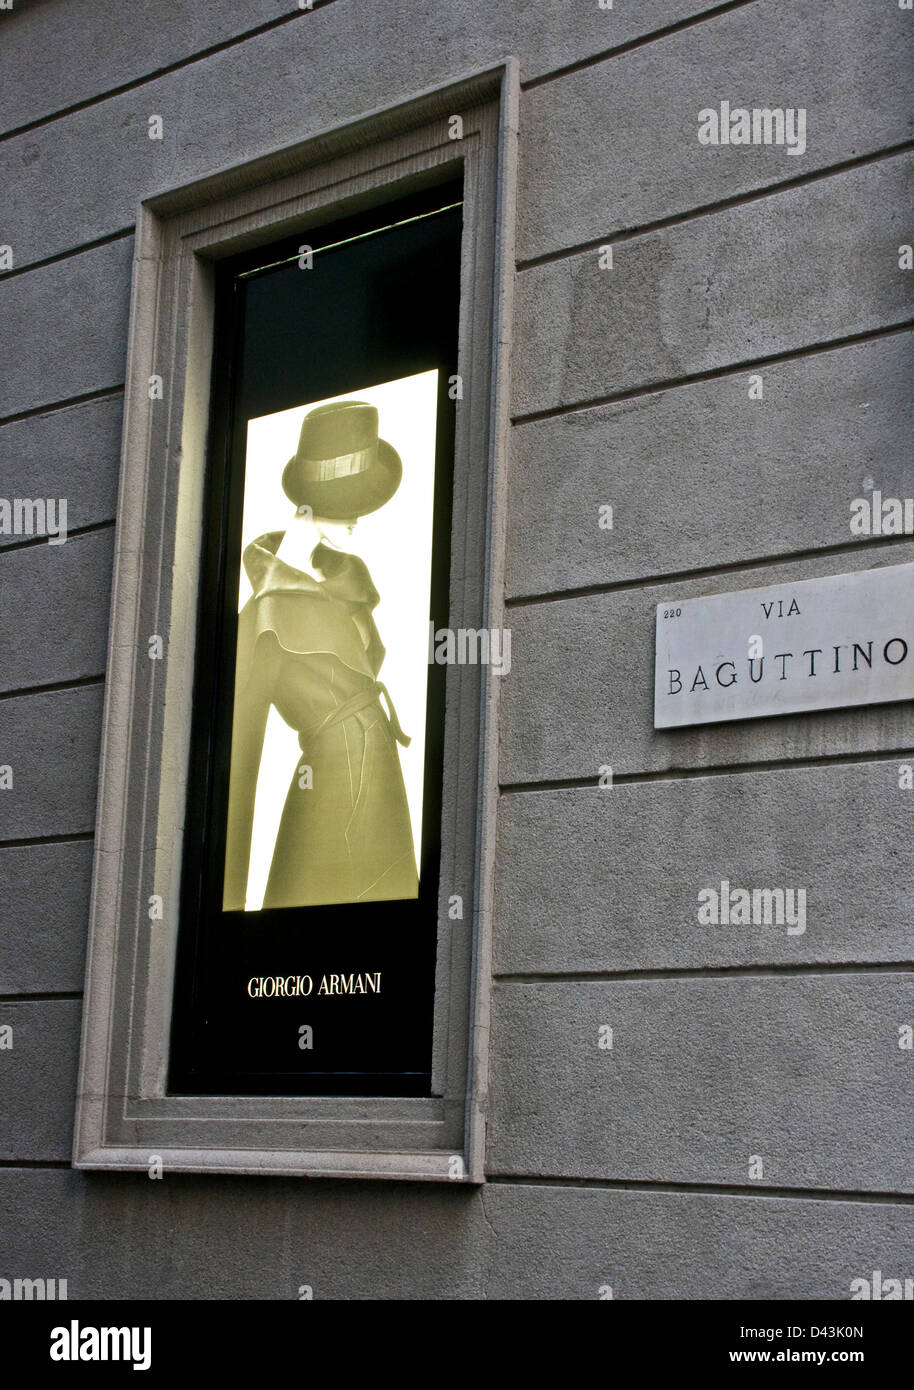 Giorgio Armani womens fashion lumineux annonce Via Baguttino Milan Lombardie Italie Europe Banque D'Images